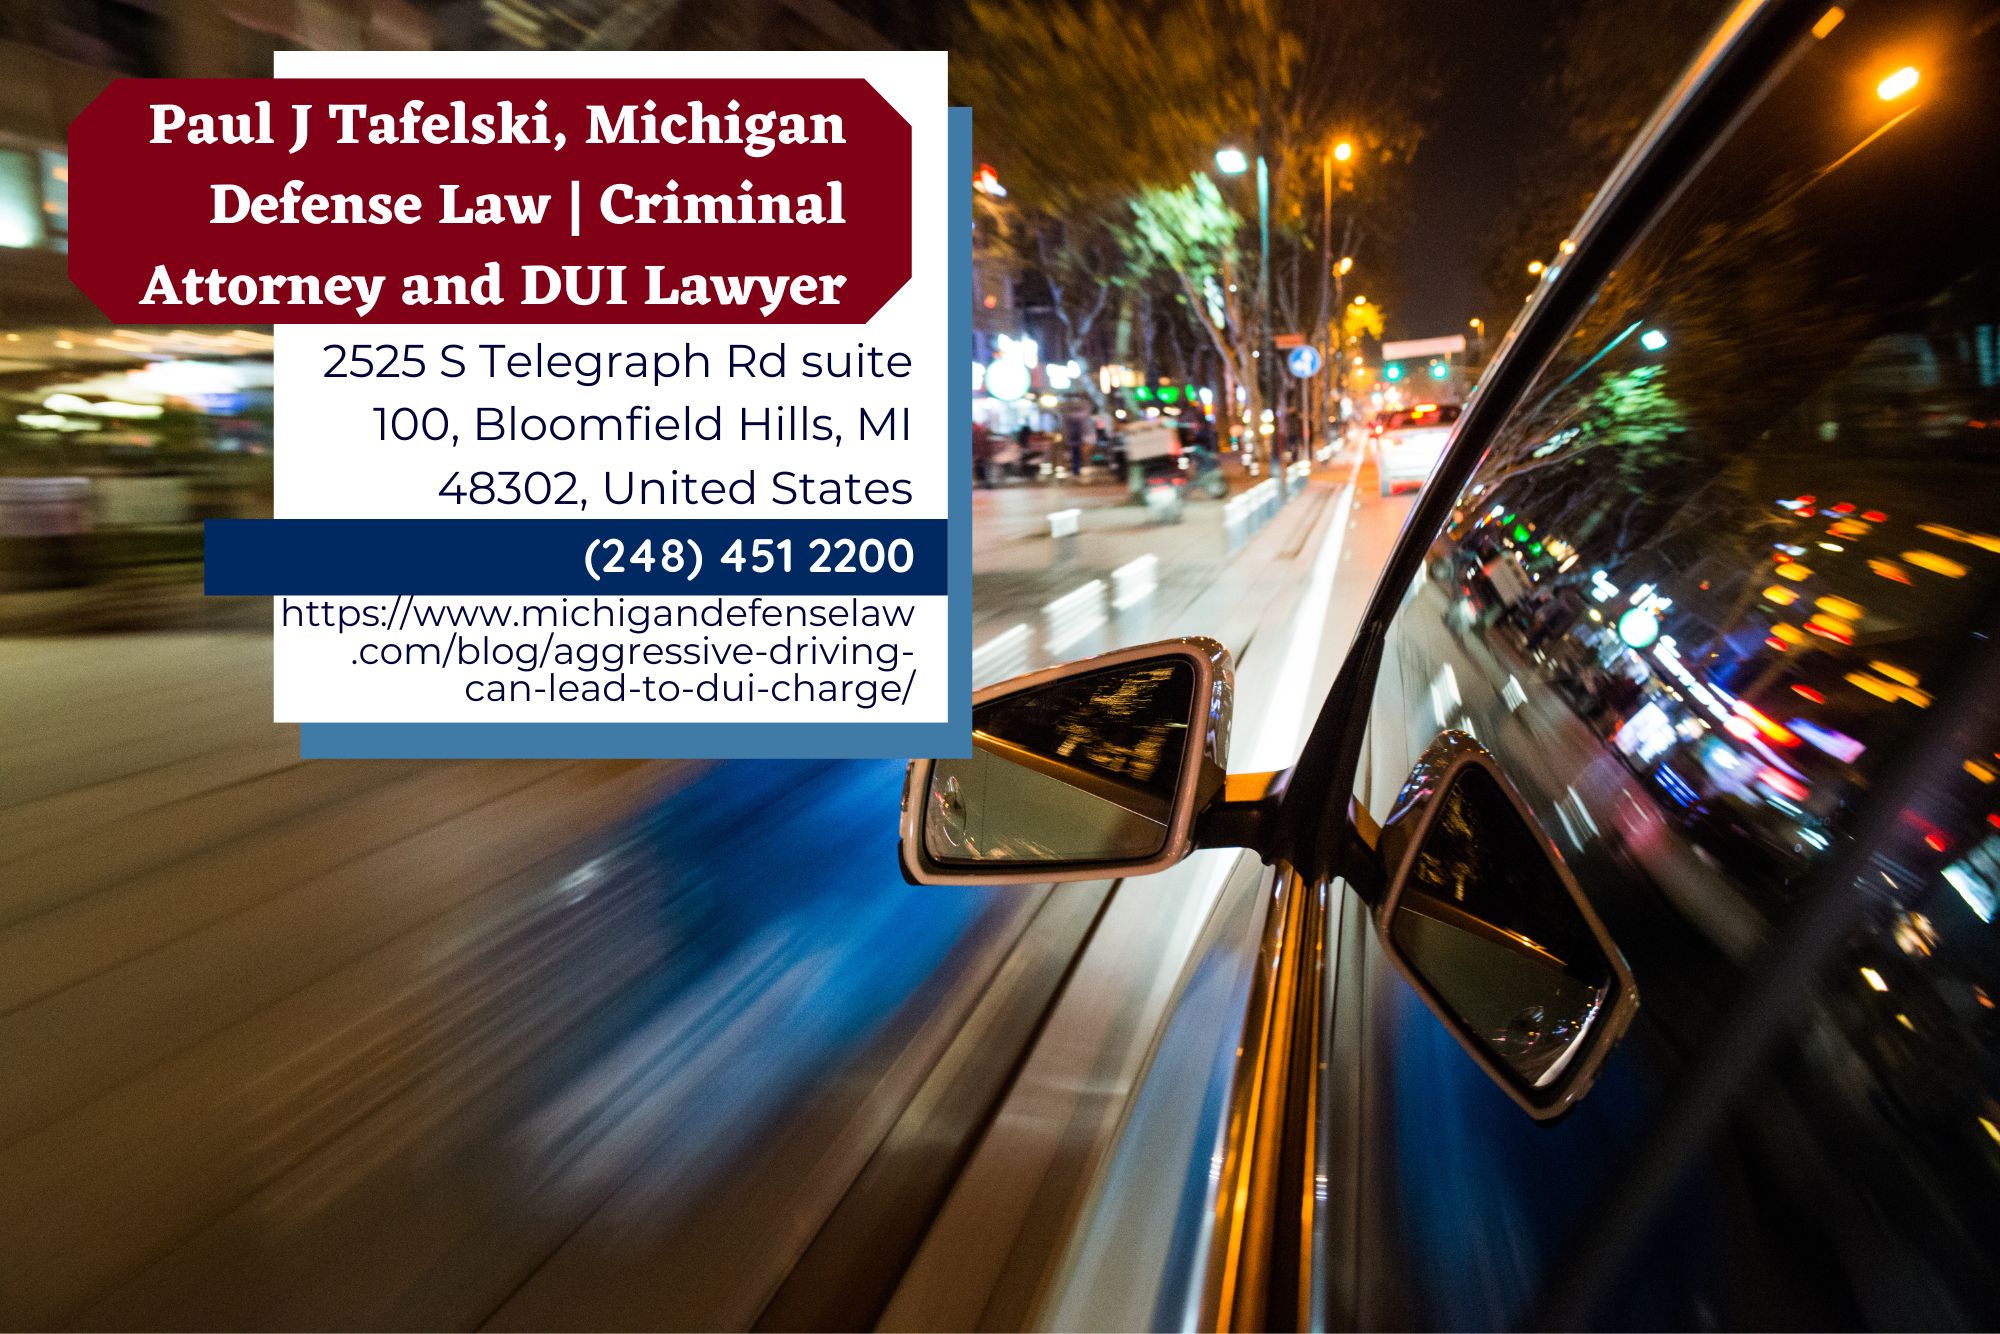 Michigan DUI Lawyer Paul J. Tafelski Highlights Aggressive Driving's Connection to DUI Charges in New Article